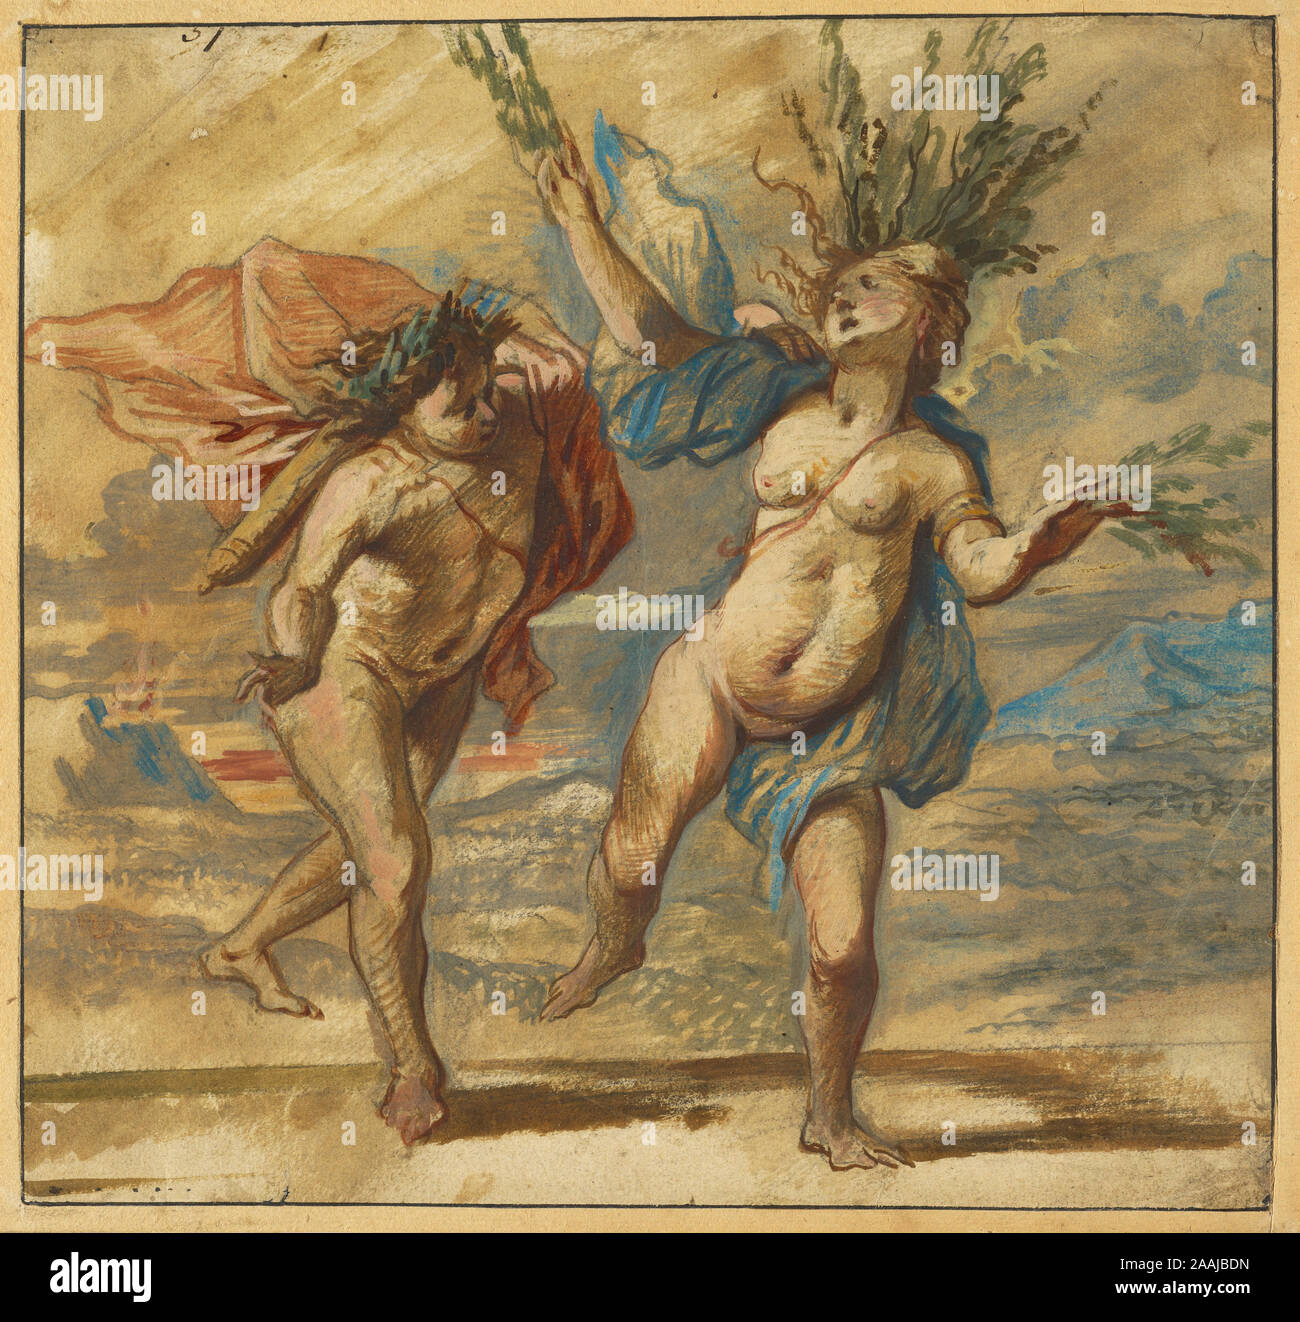 Apollo and Daphne; Jan Boeckhorst (German, about 1604 - 1668); about 1640; Black chalk, pen and brown ink, watercolor, and white gouache heightening; 22.1 x 23.2 cm (8 11/16 x 9 1/8 in.) Stock Photo